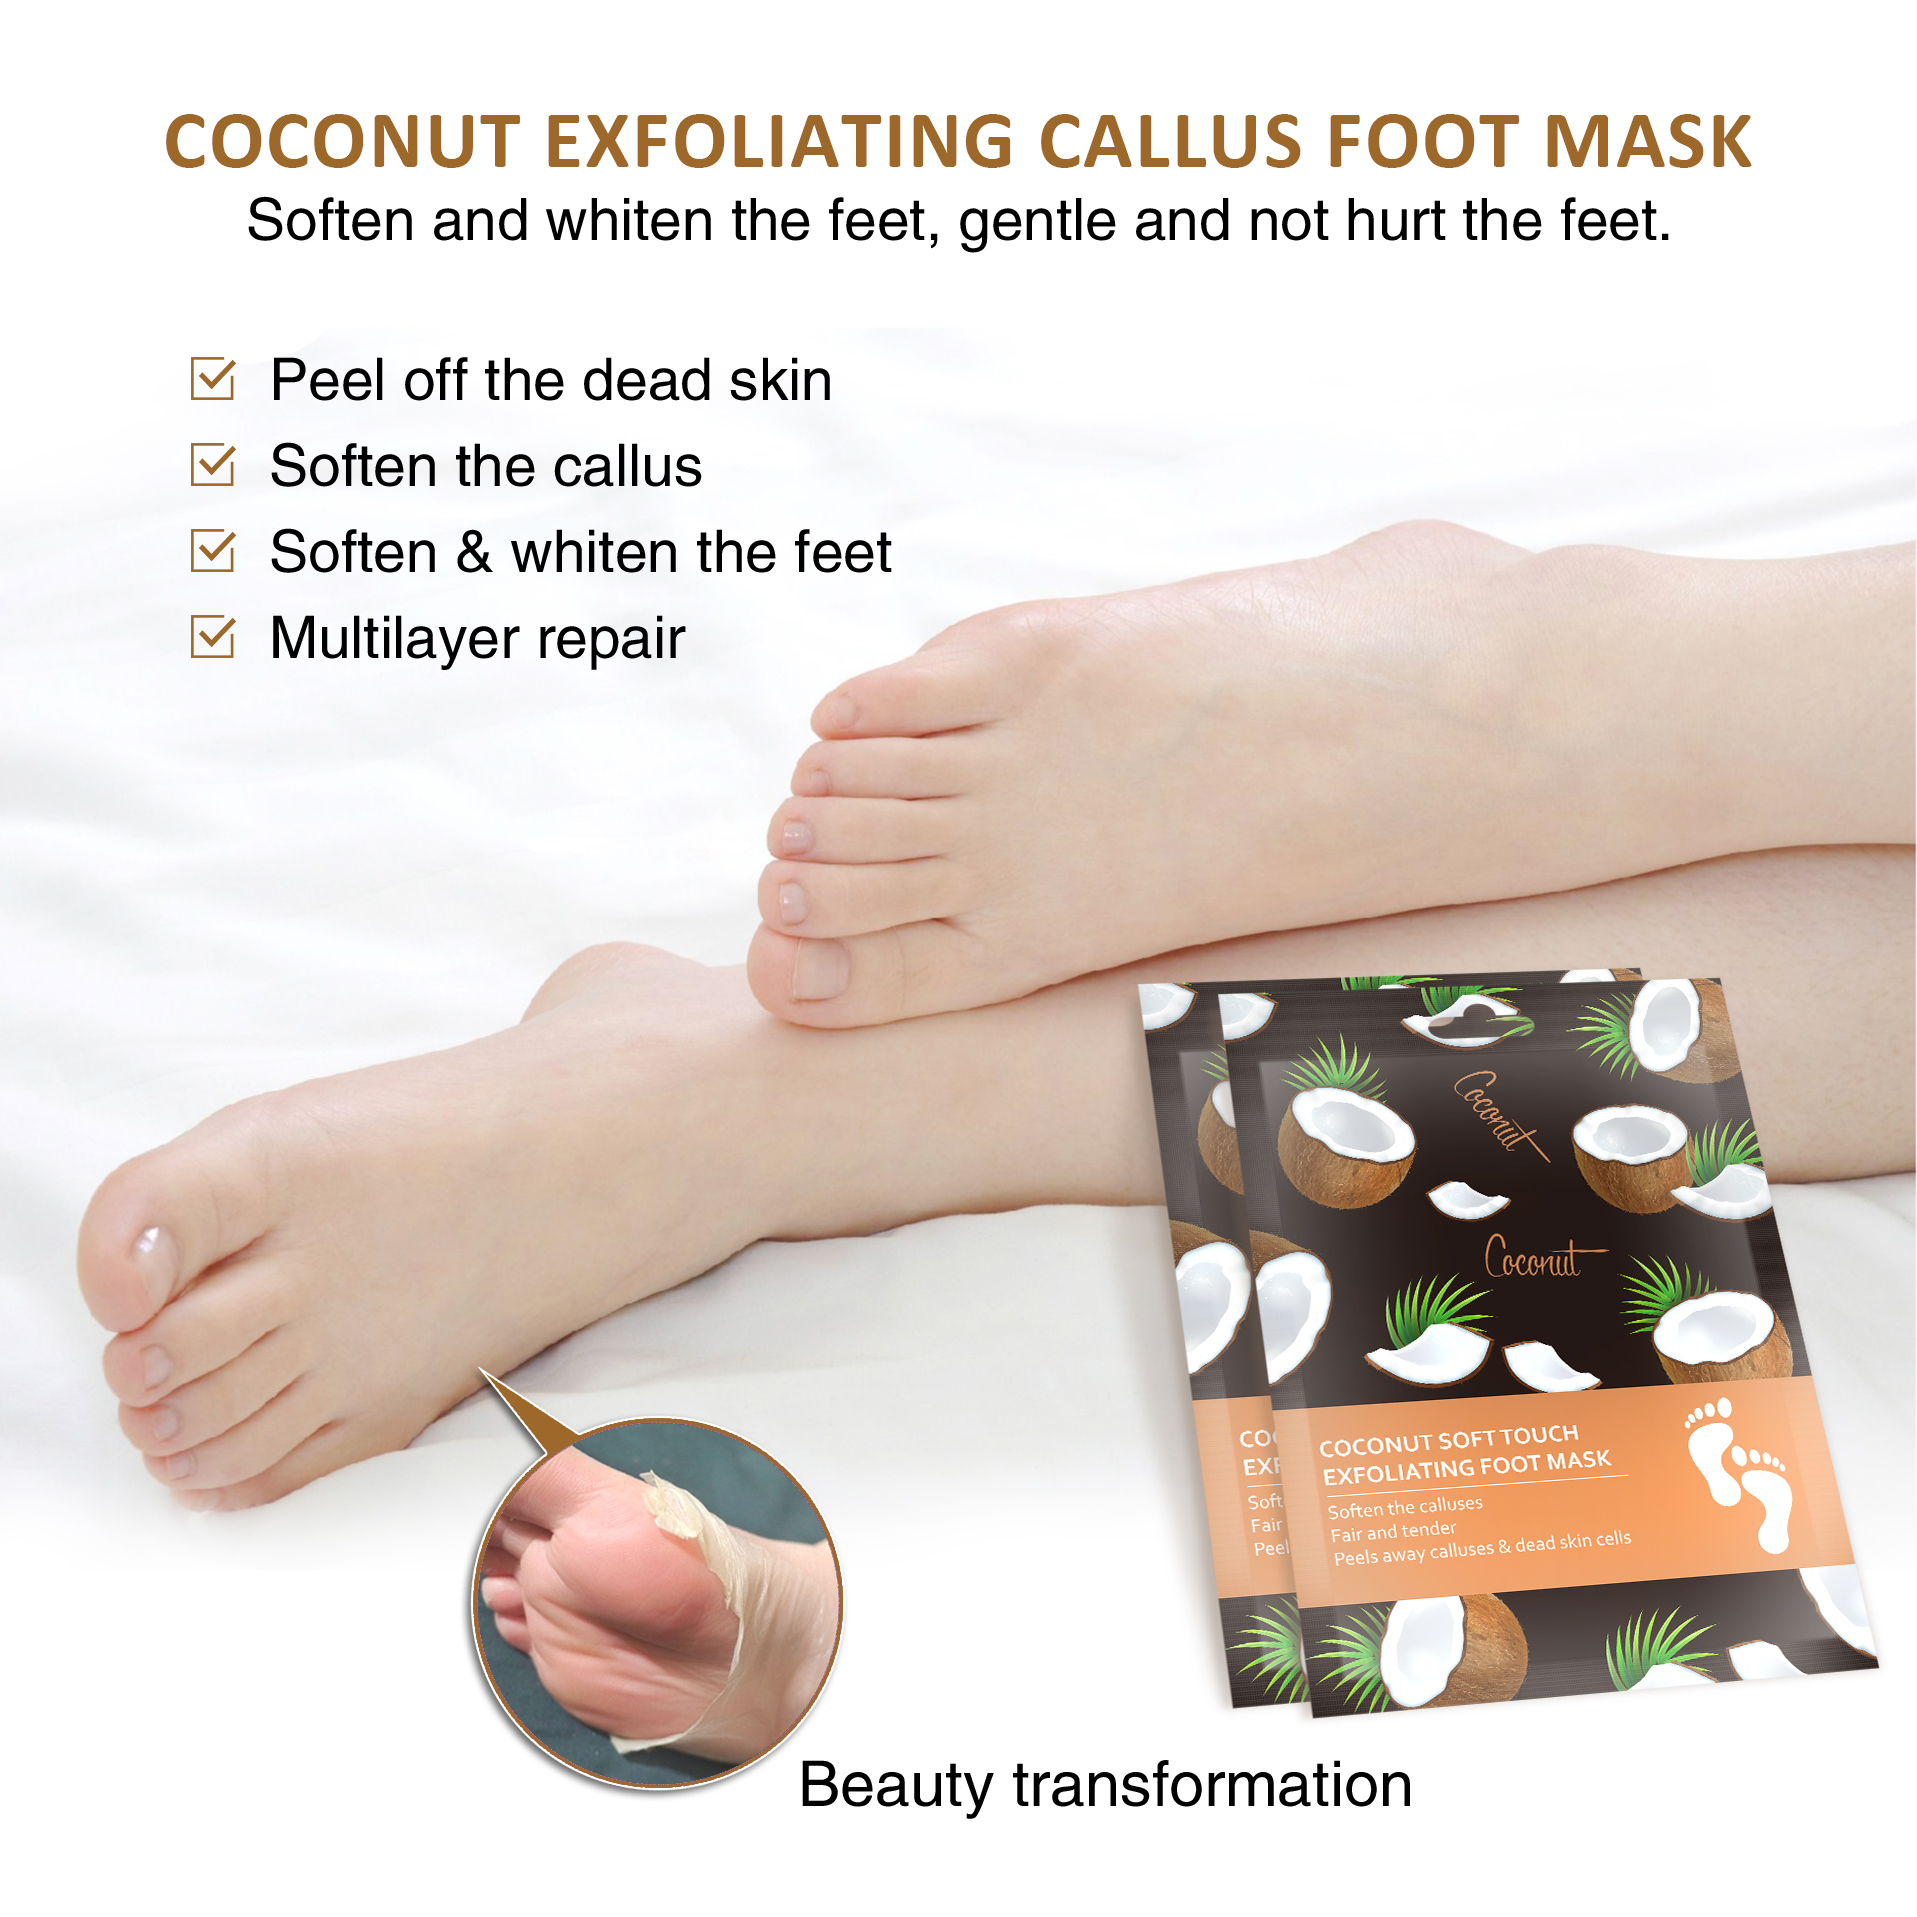 Coconut Exfoliating Foot Mask for Women and Men Feet Peeling Mask Exfoliating By LIRAINHAN